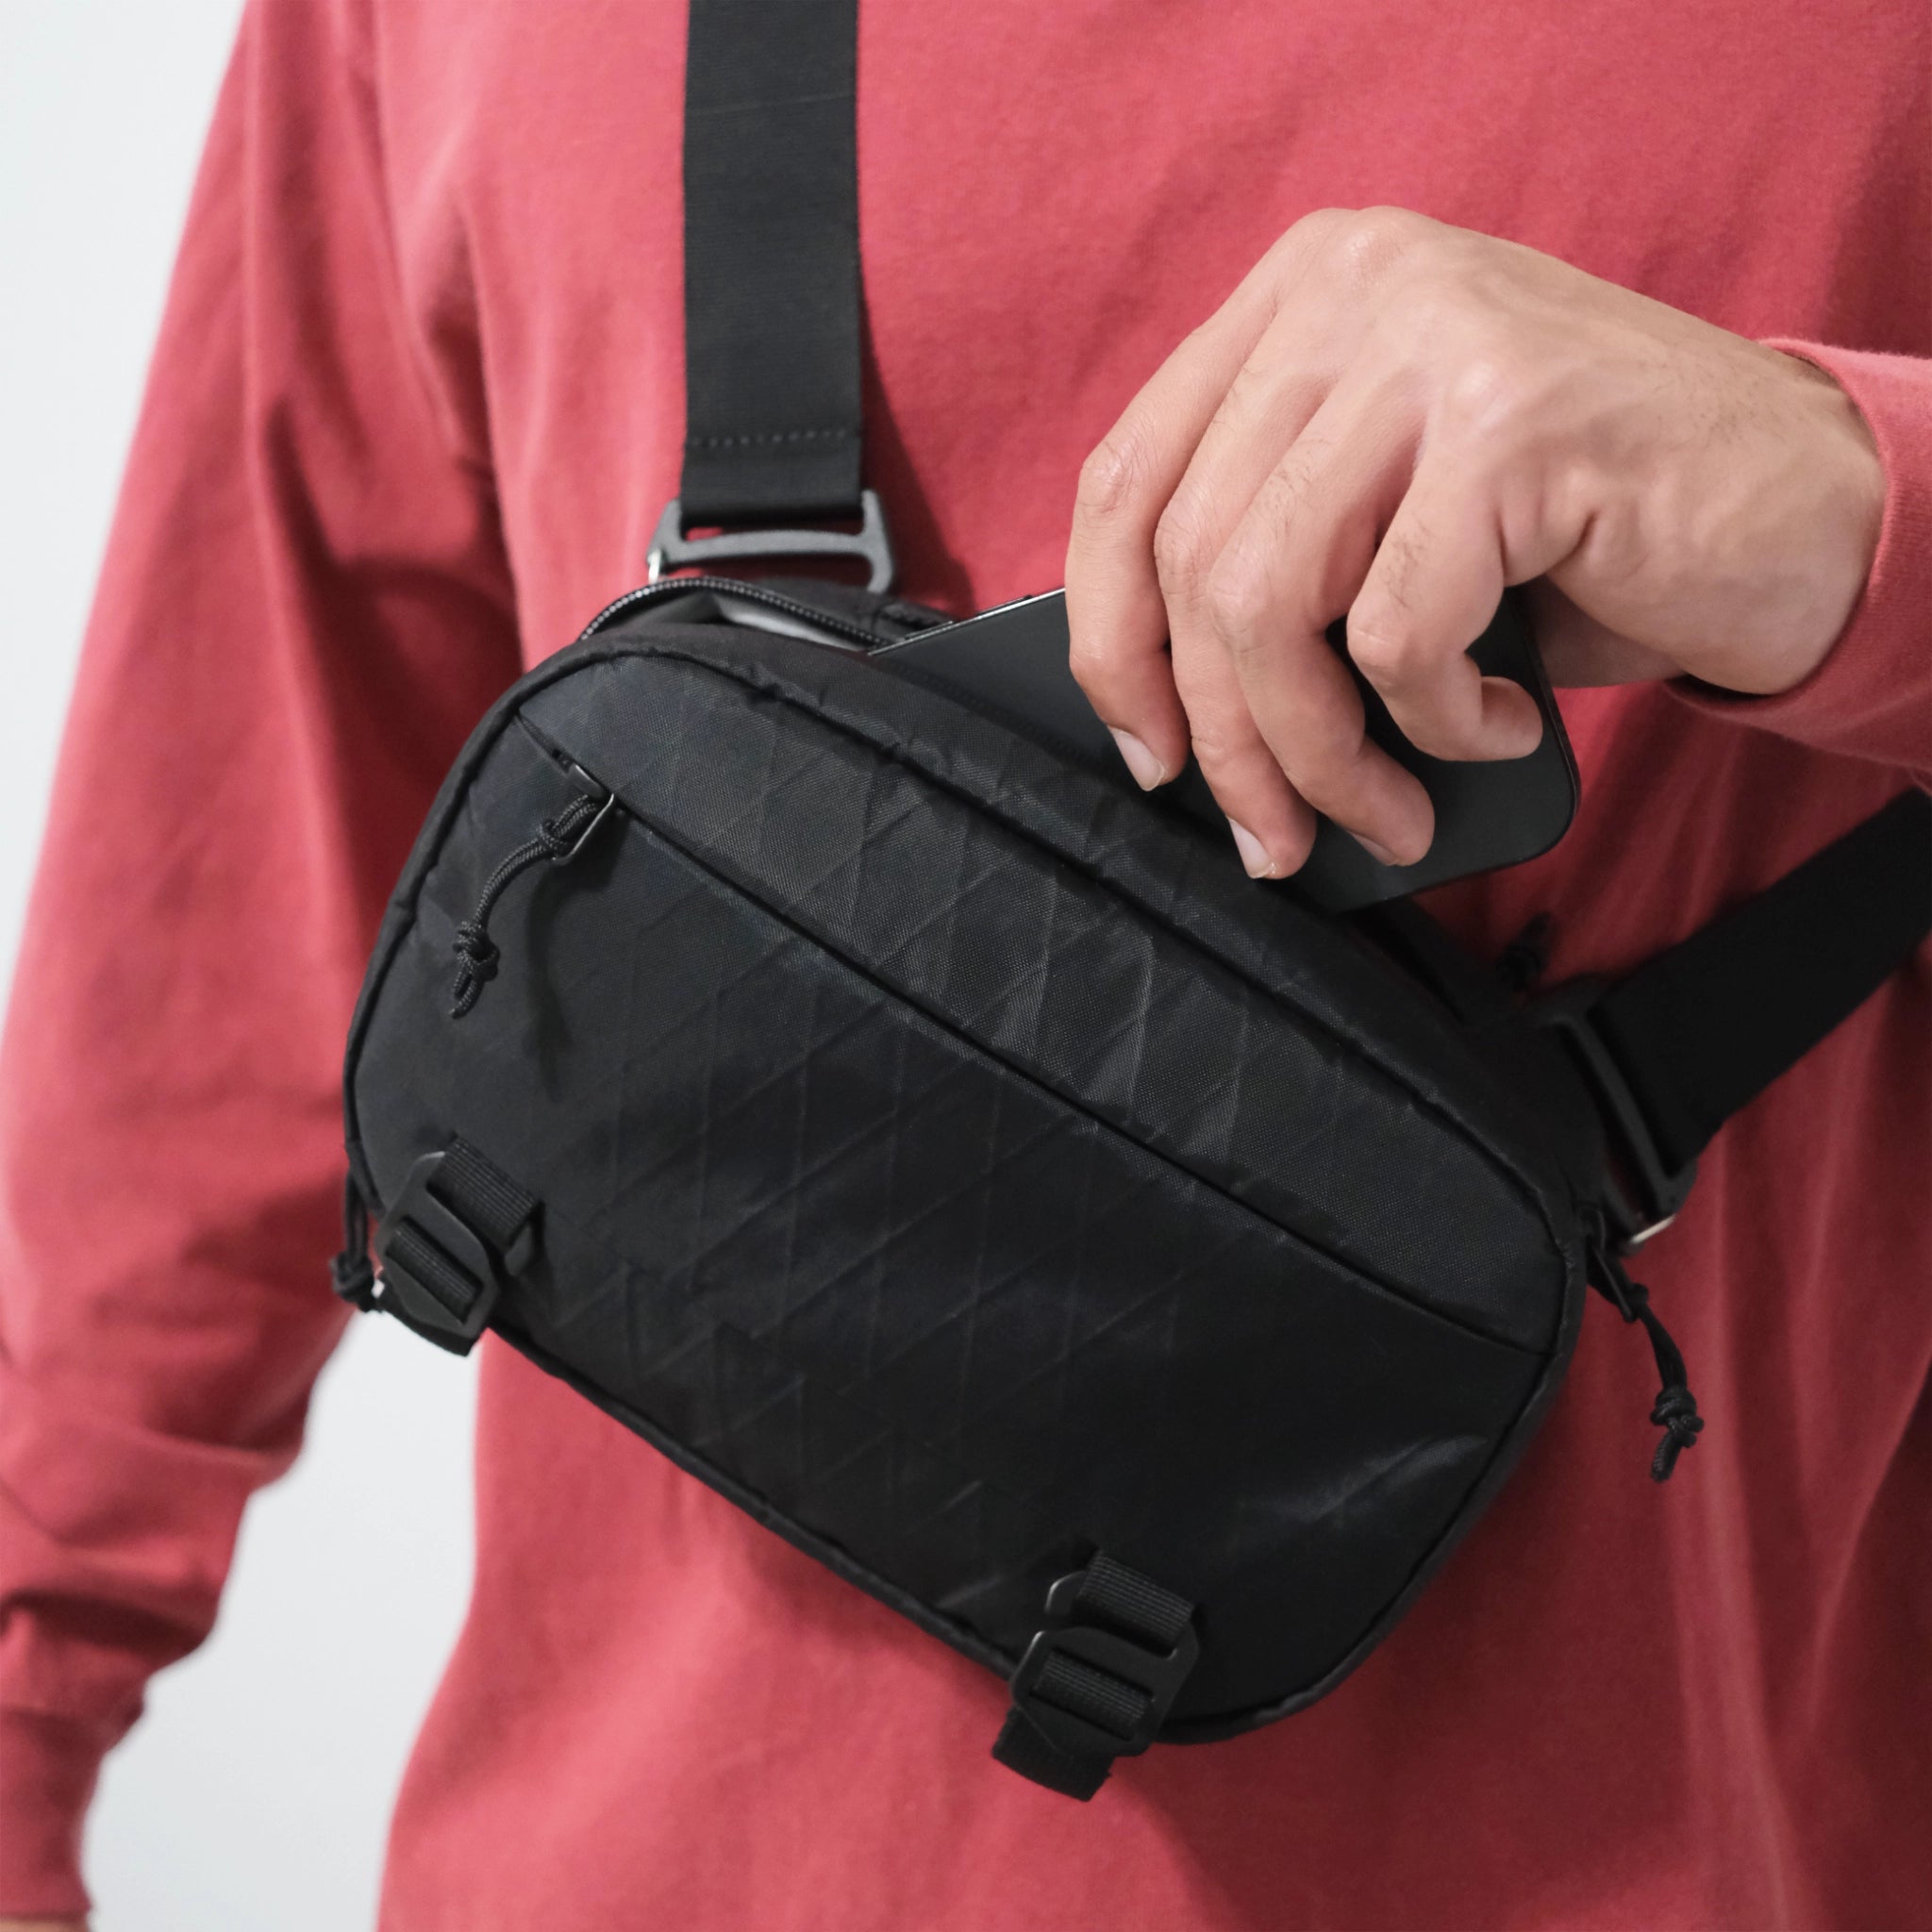 Essent Sling | An Everyday Carry Essential – Outallday